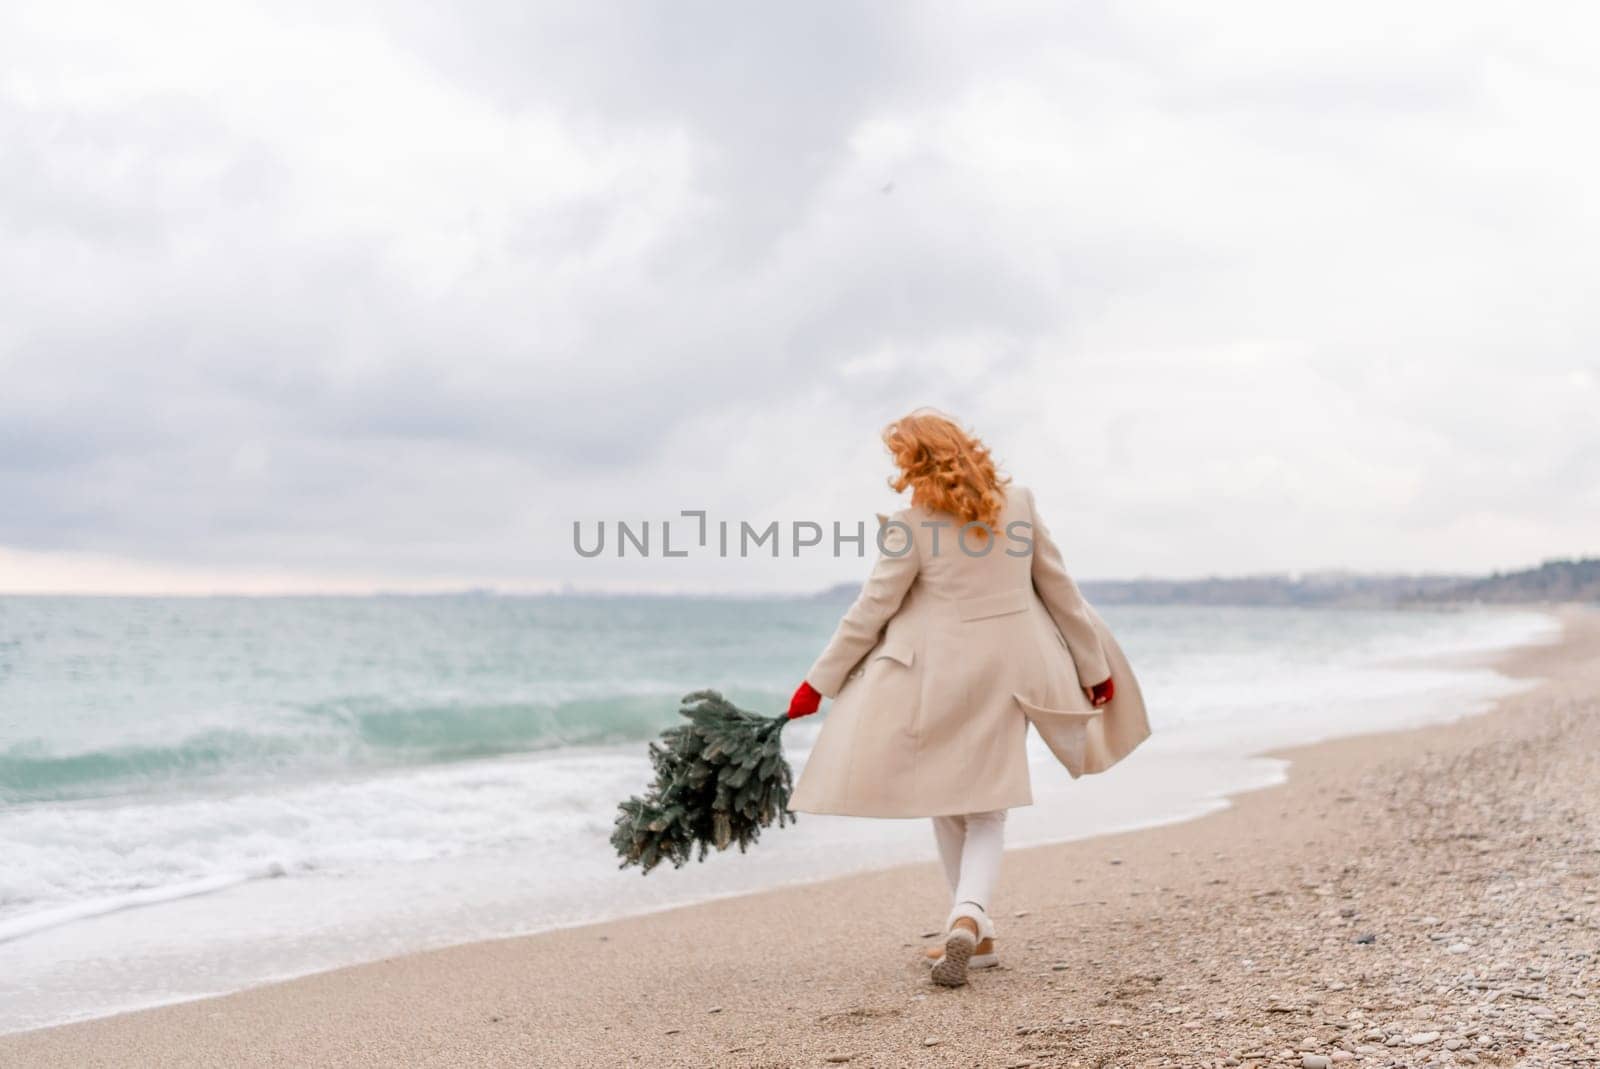 Redhead woman Christmas tree sea. Christmas portrait of a happy redhead woman walking along the beach and holding a Christmas tree in her hands. Dressed in a light coat, white suit and red mittens. by Matiunina